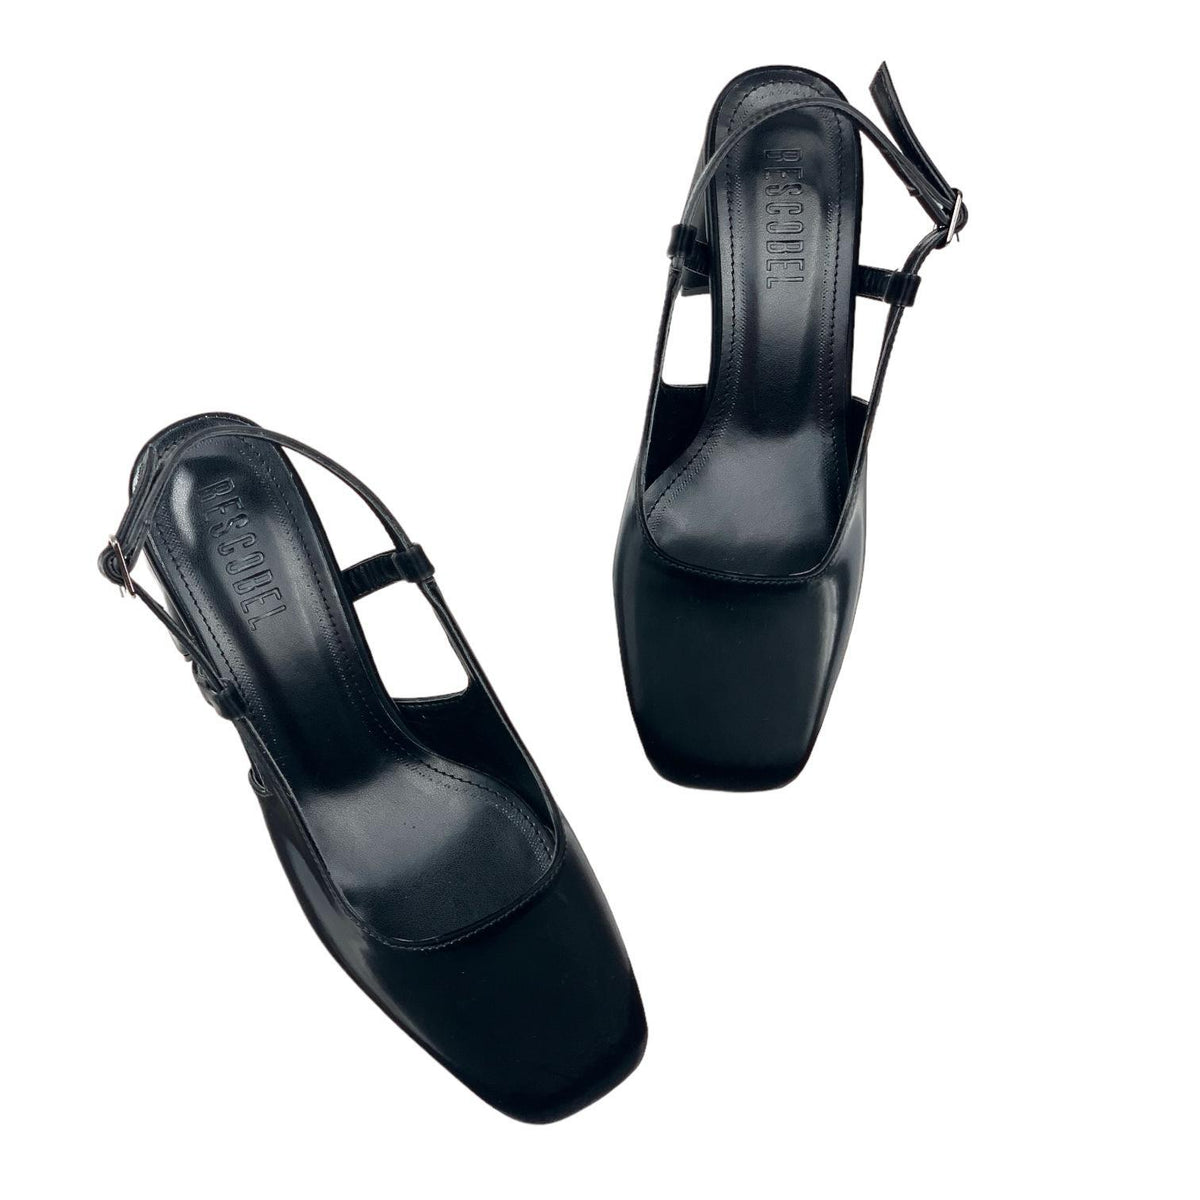 Women's Collar Black Silky Material Round Toe Open Back Sandals 8 Cm - STREETMODE™